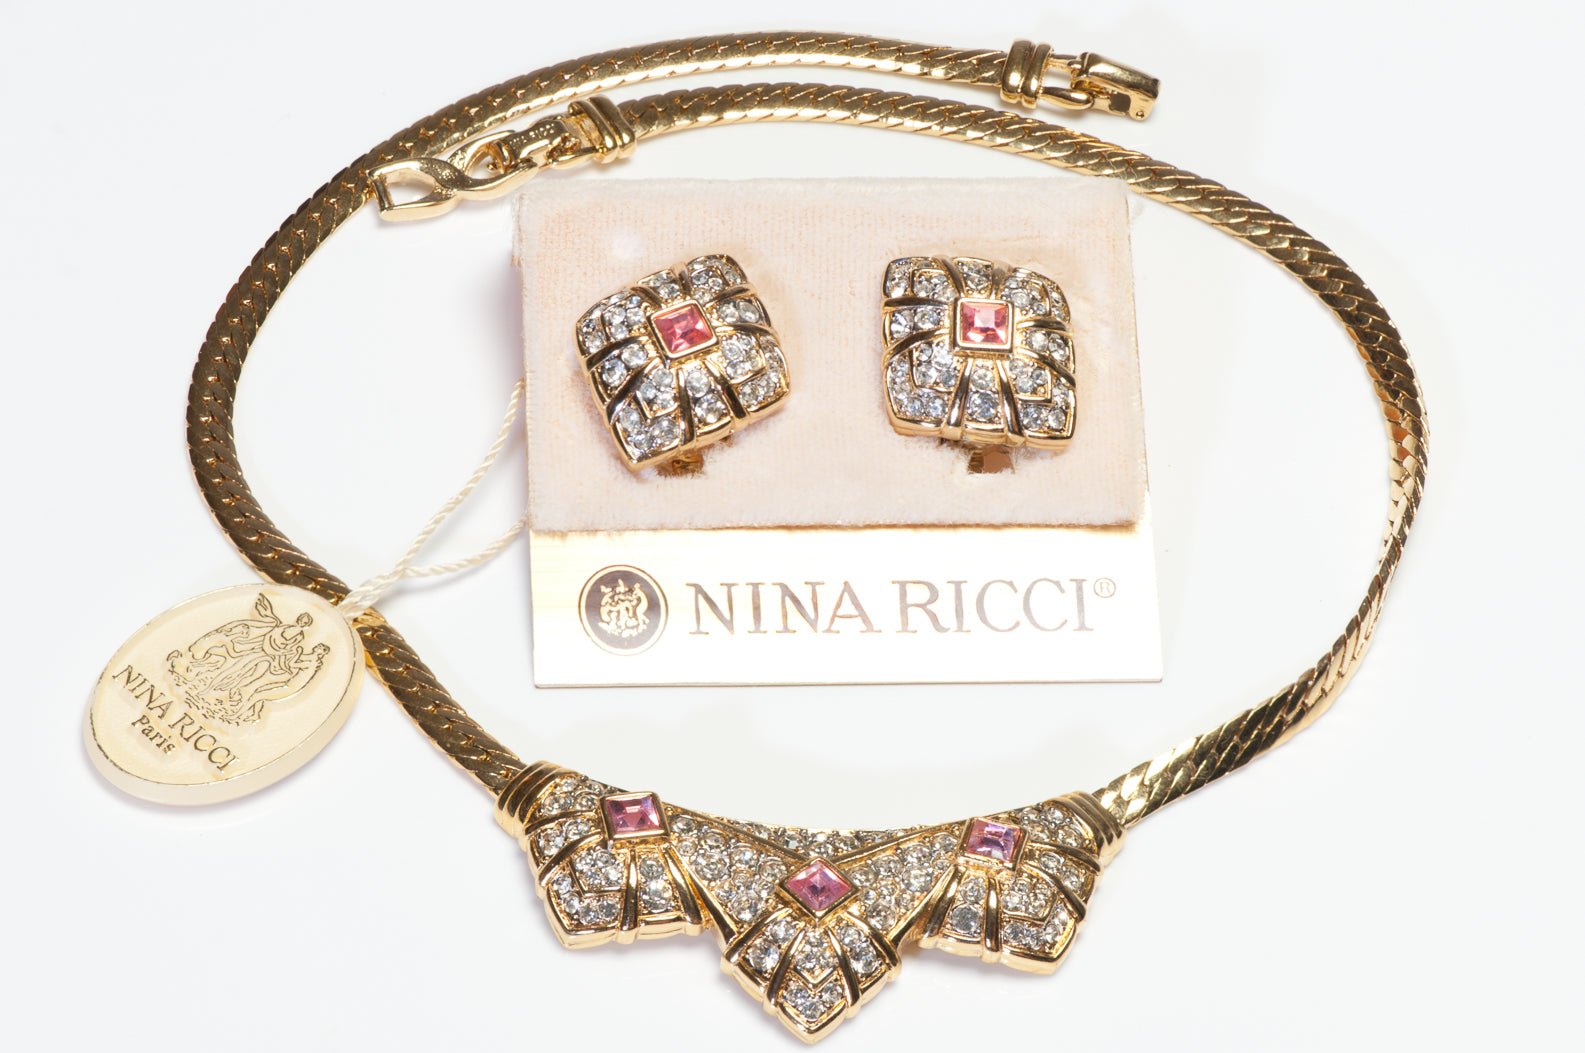 Vintage Nina Ricci Gold Plated Pink Crystal Earrings Necklace Set